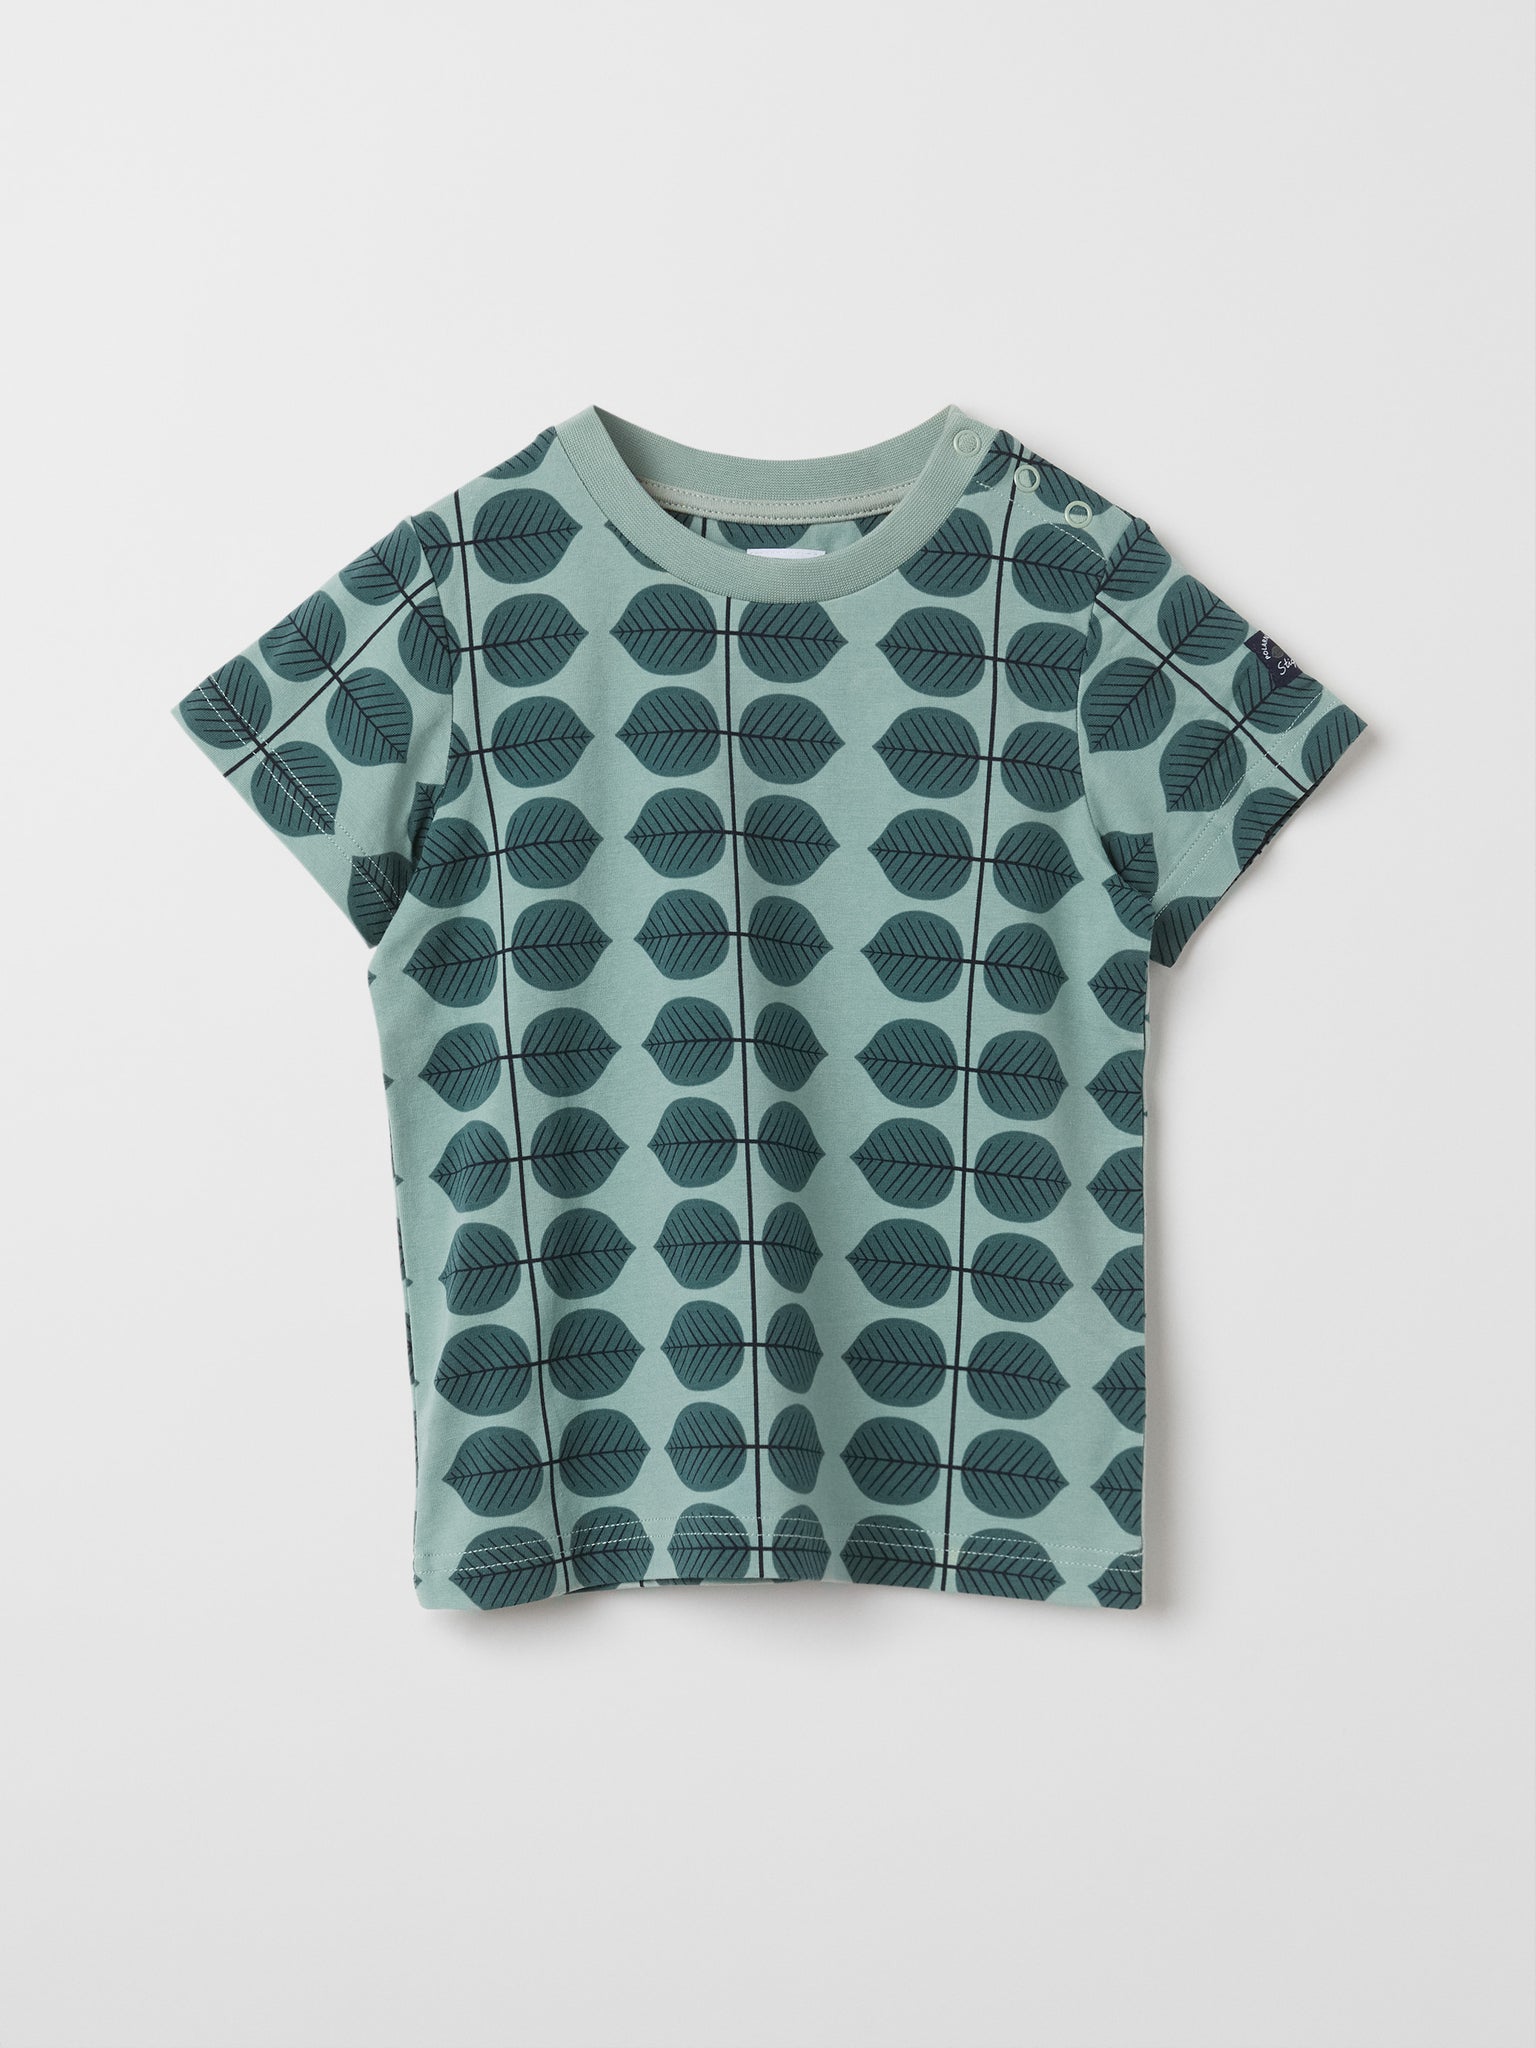 Green Scandi Print Kids T-Shirt from the Polarn O. Pyret kidswear collection. Nordic kids clothes made from sustainable sources.